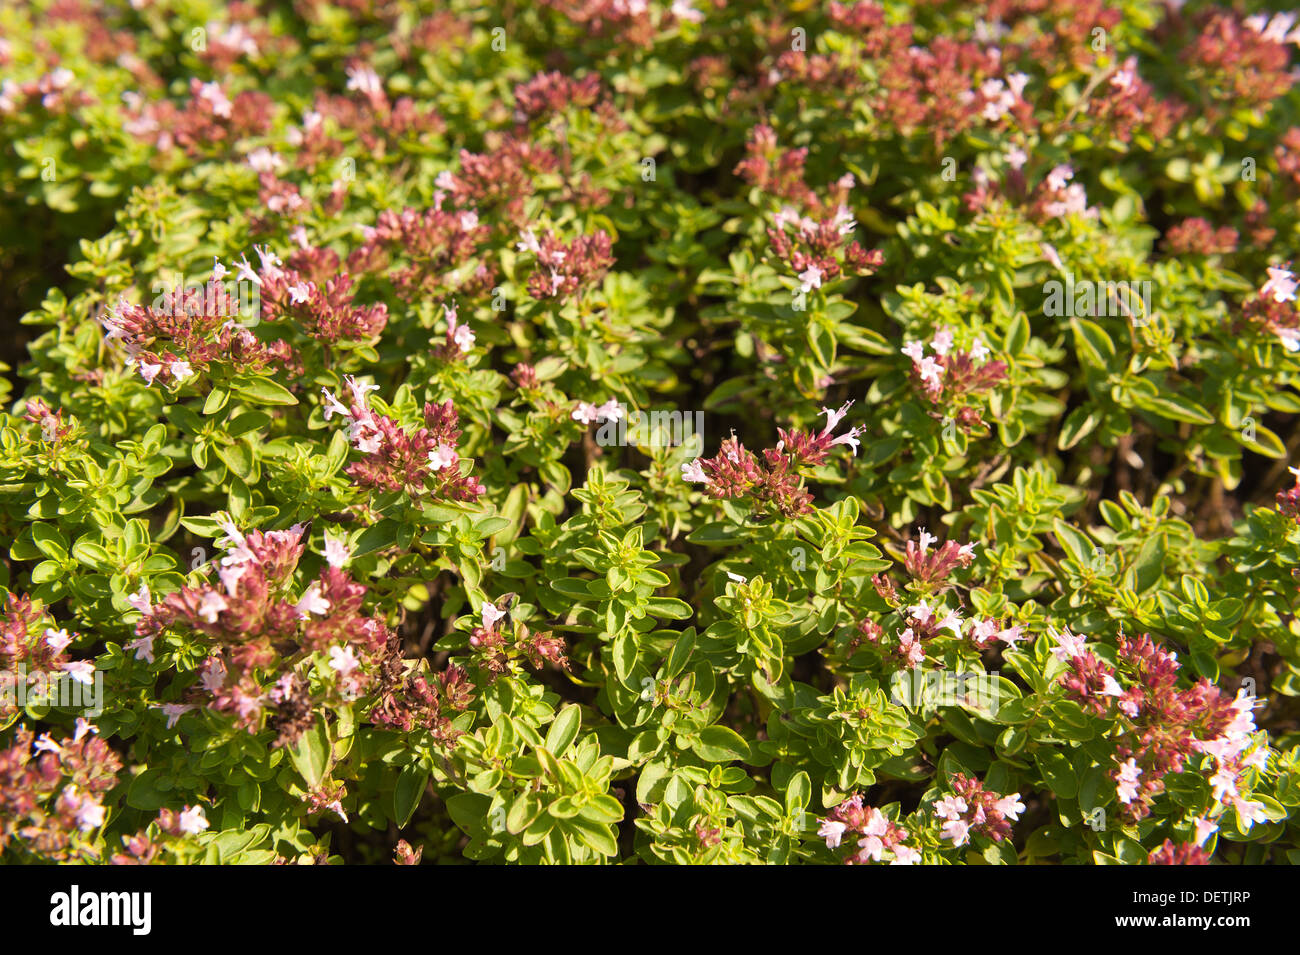 Dwarf oregano blooming profusely with large clusters of small pink flowers in summer Stock Photo